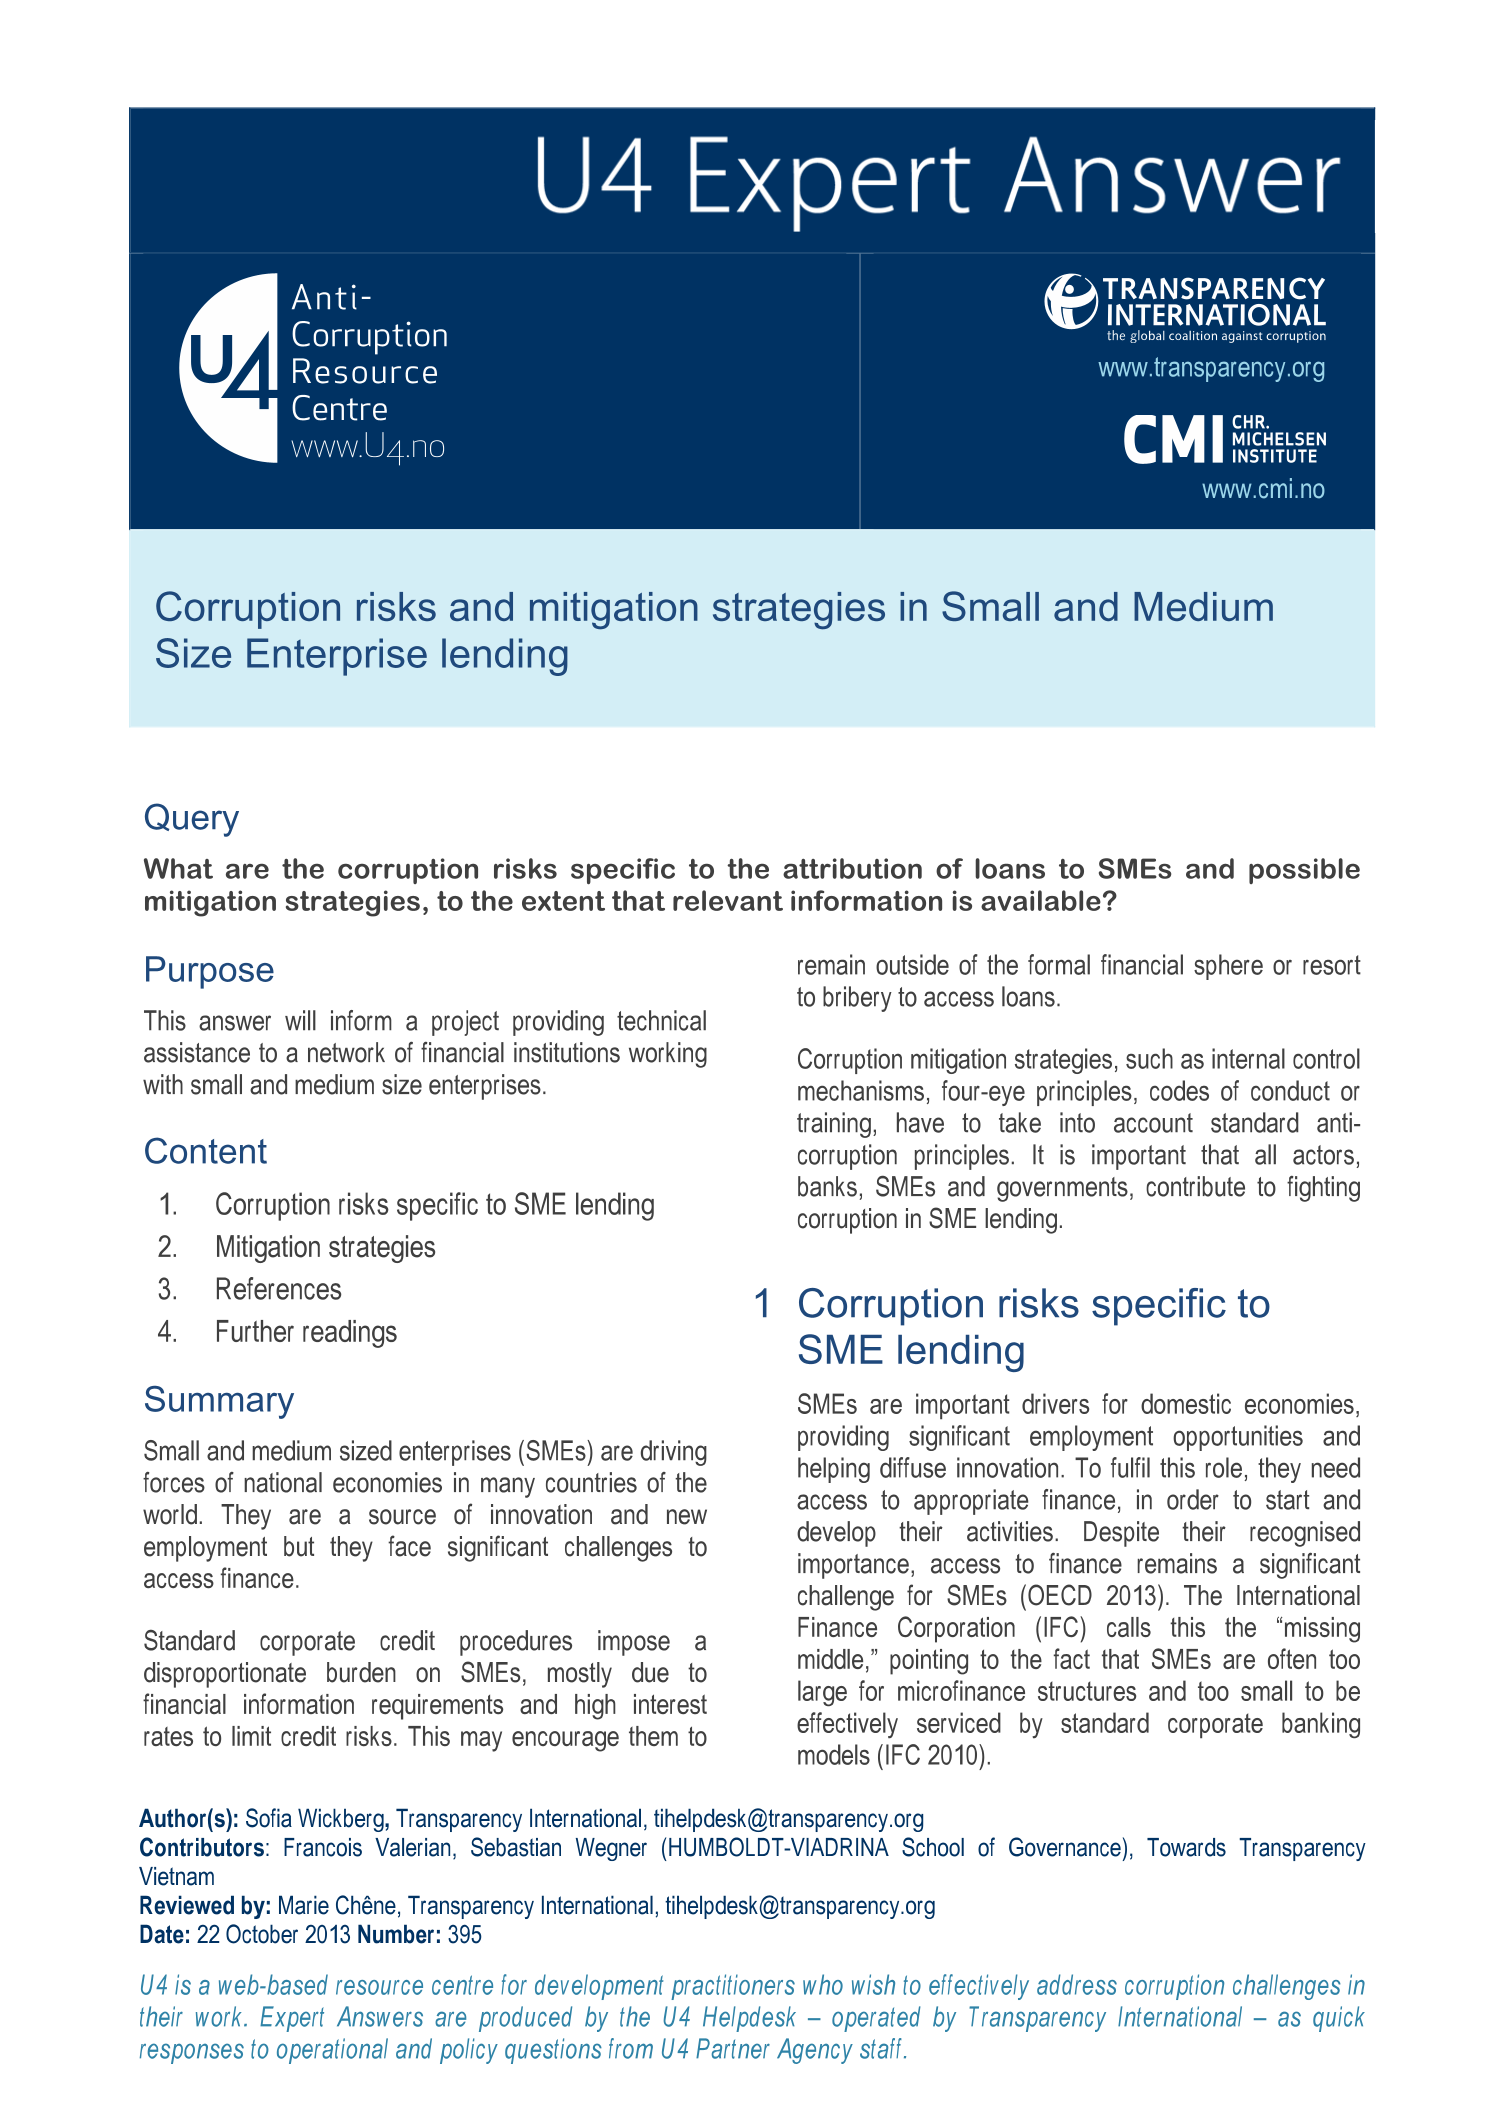 Corruption risks and mitigation strategies in Small and Medium Size Enterprise lending